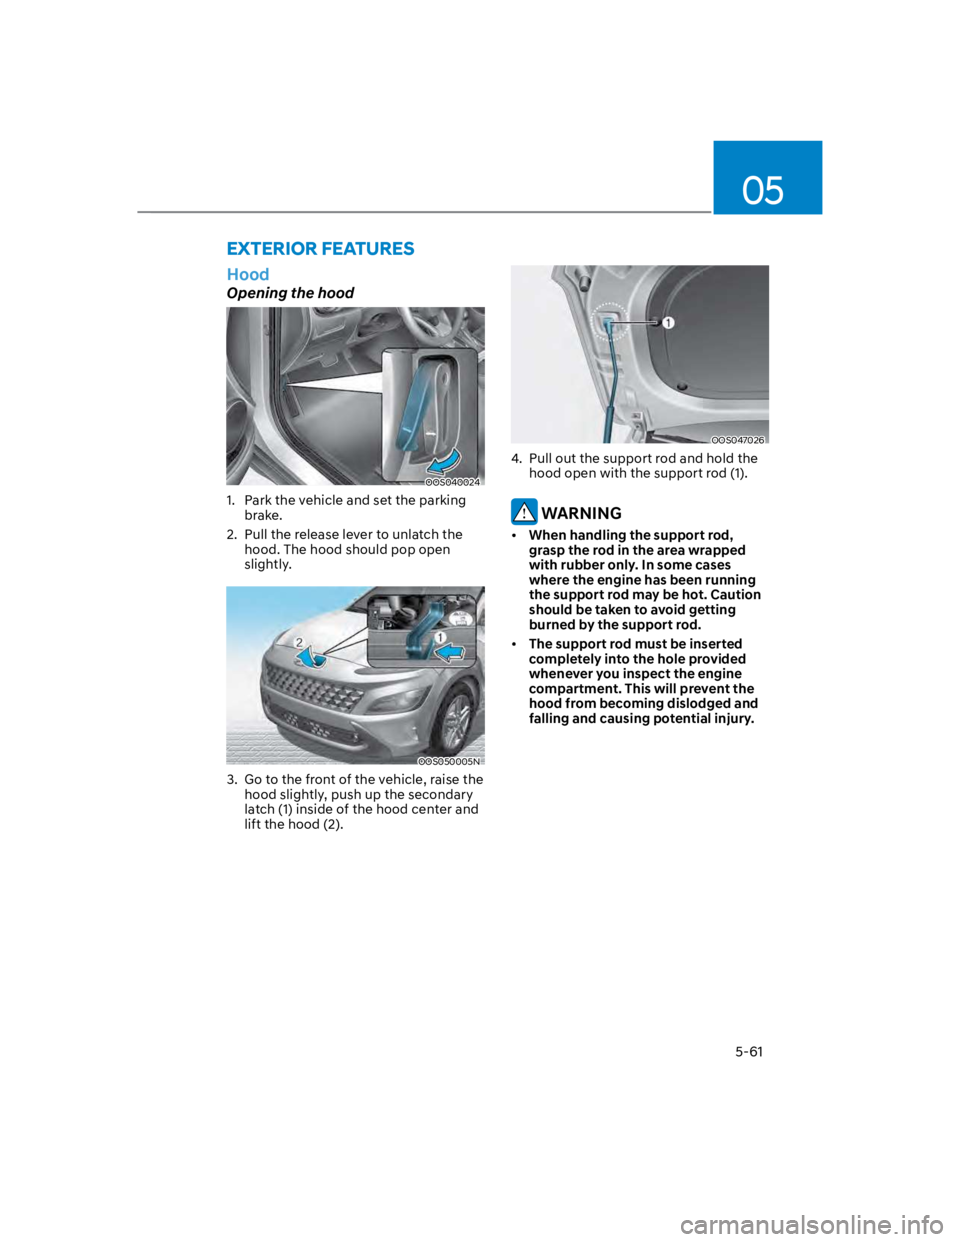 HYUNDAI KONA 2022 Repair Manual 05
5-61
Hood
Opening the hood
OOS040024 
1.  Park the vehicle and set the parking 
brake.
2.  Pull the release lever to unlatch the 
hood. The hood should pop open 
slightly.
OOS050005N
3.  Go to the 